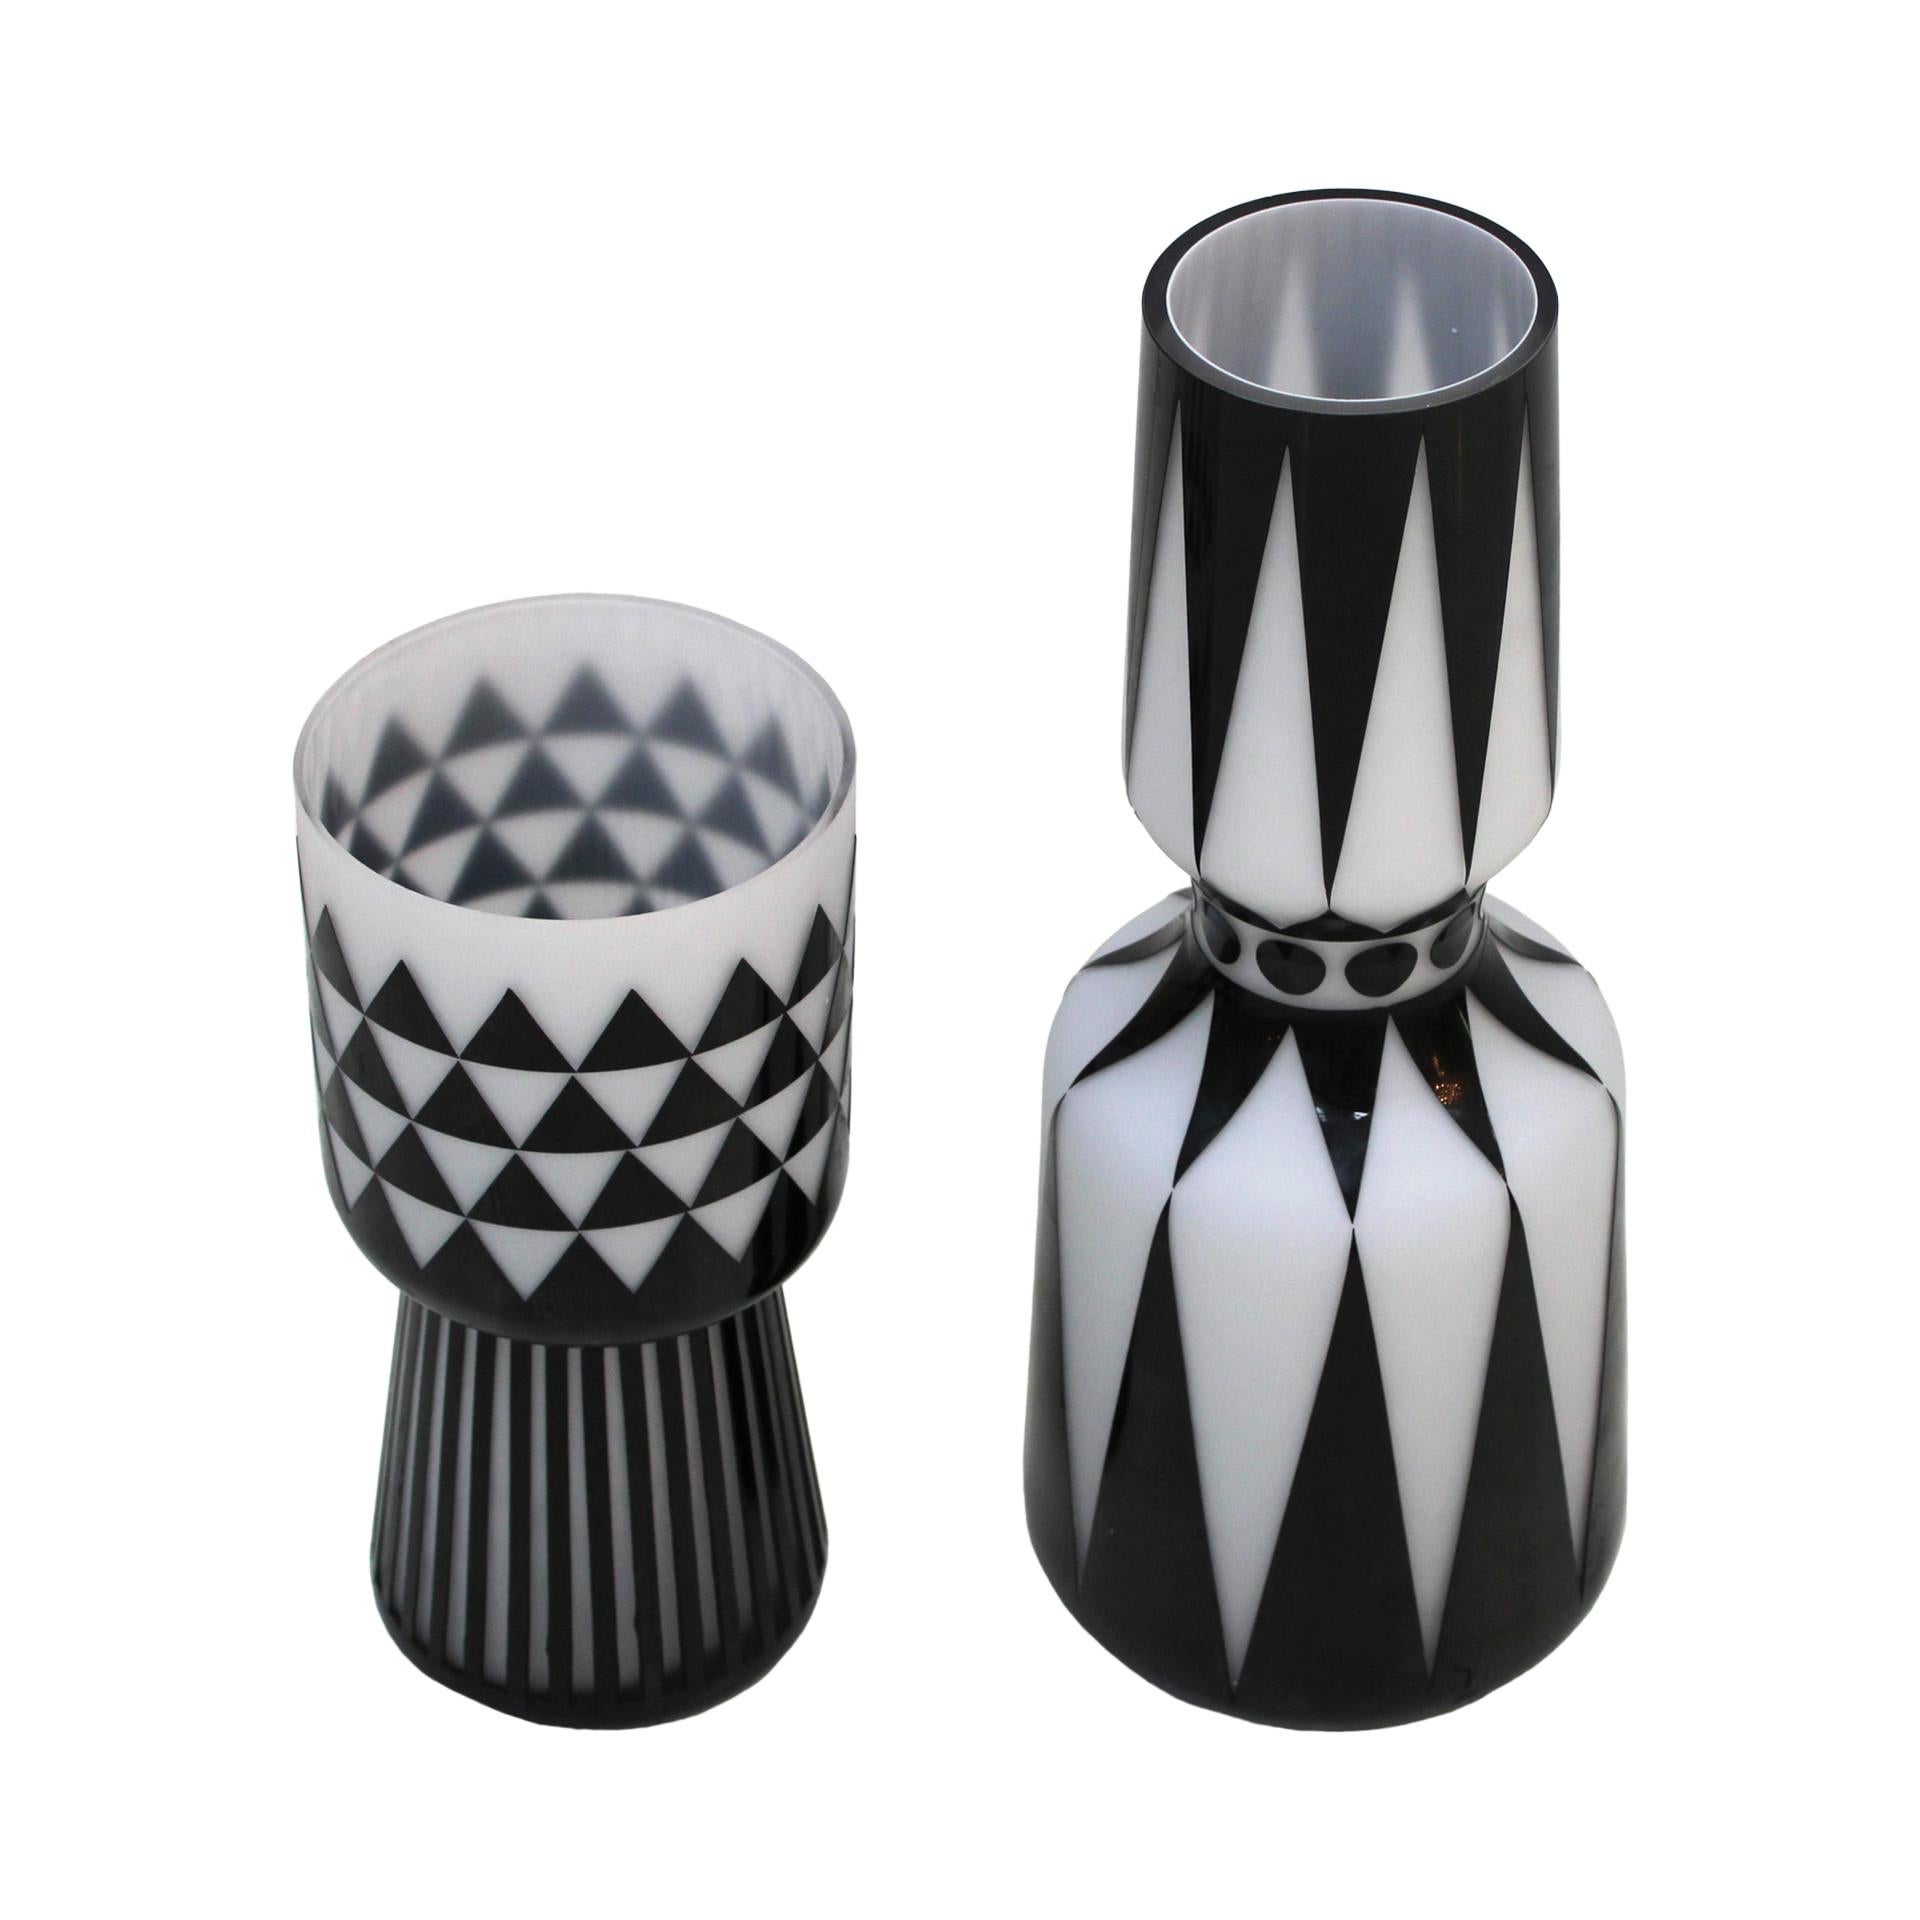 Pair of Italian vases handcrafted in the 80s. With hand - carved geometric motifs.

Measures: Big vase: Diameter 17 x Height 44 cm

Small vase: Diameter 14 x Height 31 cm.

Every item LA Studio offers is checked by our team of 10 craftsmen in our